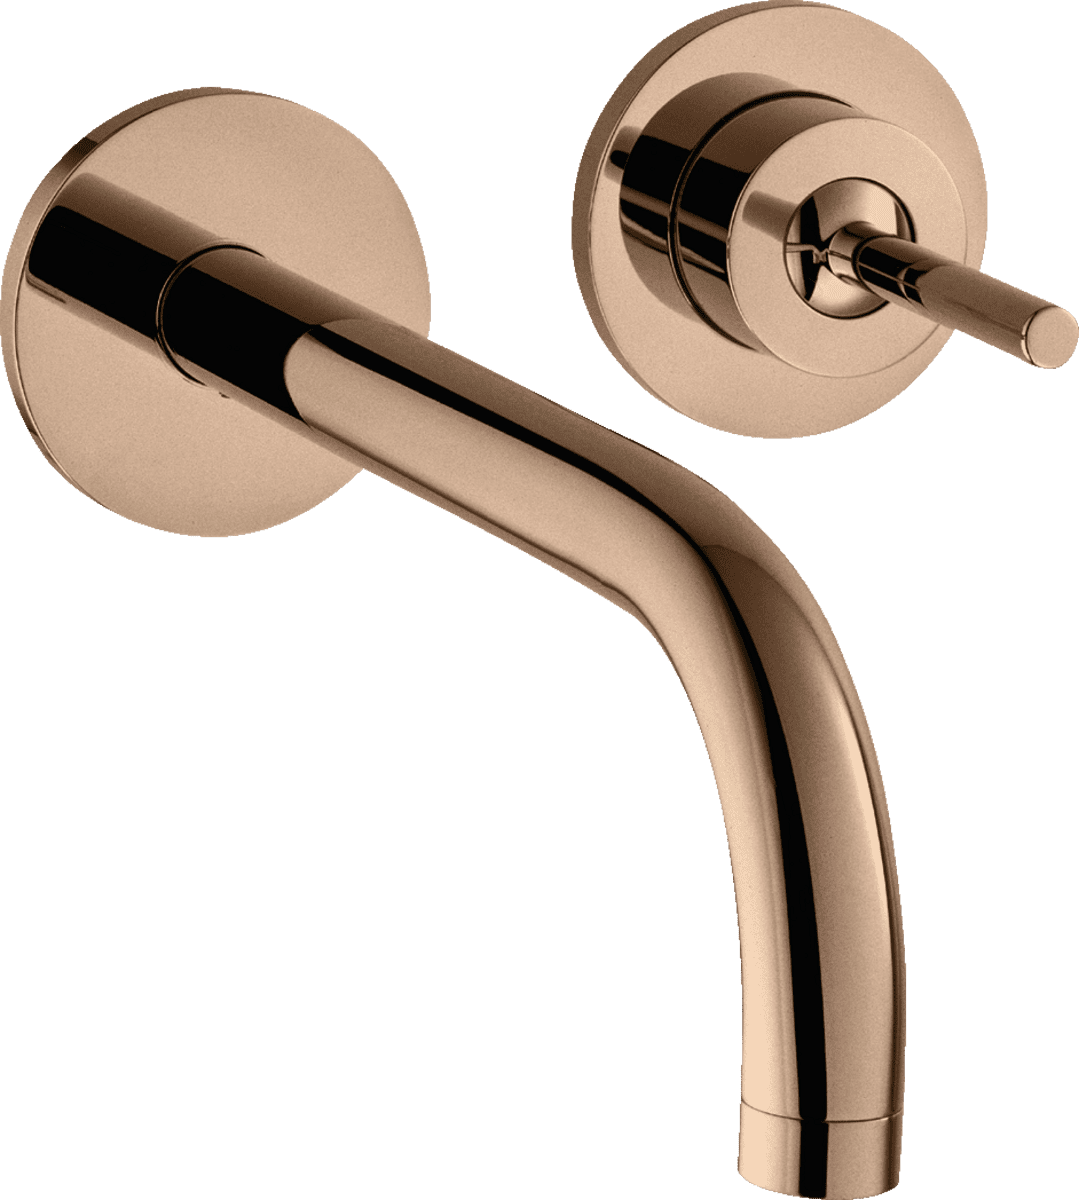 Picture of HANSGROHE AXOR Uno Single lever basin mixer for concealed installation wall-mounted with spout 225 mm and escutcheons #38116300 - Polished Red Gold